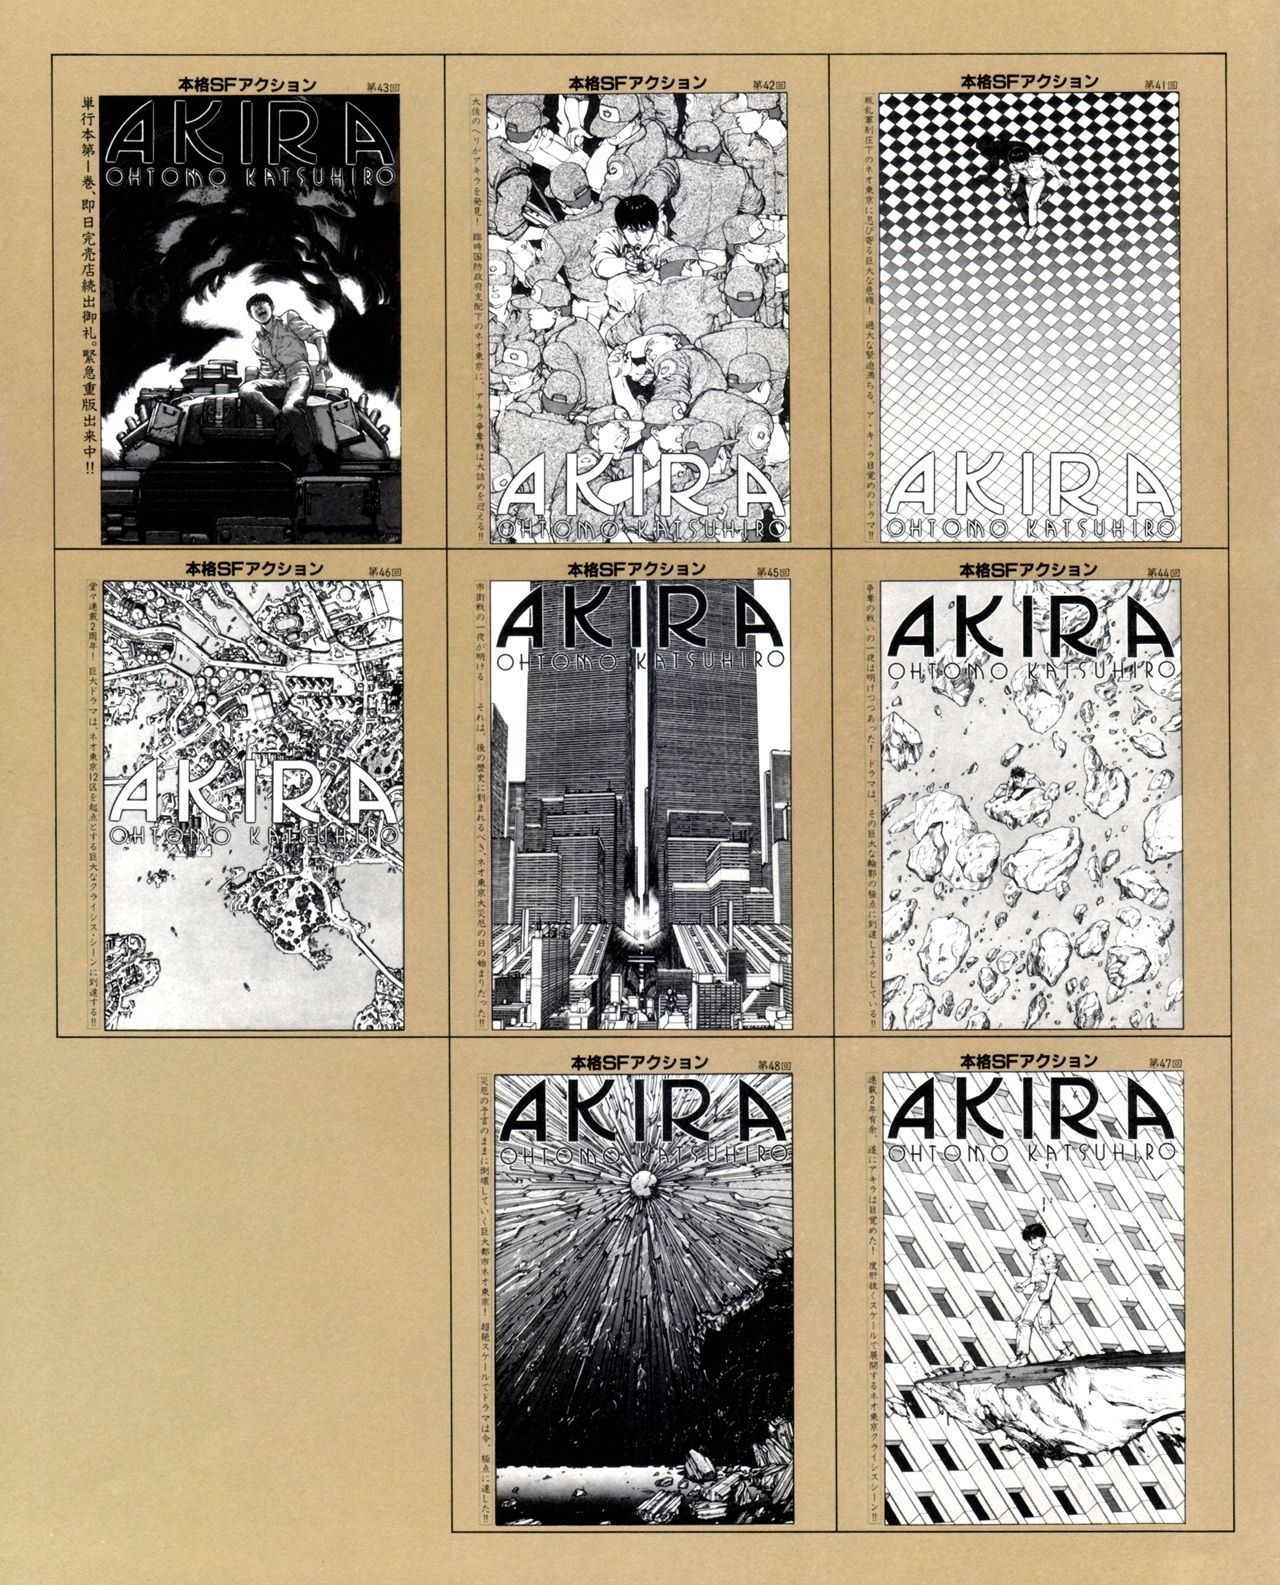 Akira club - The memory of Akira lives on in our hearts! 103